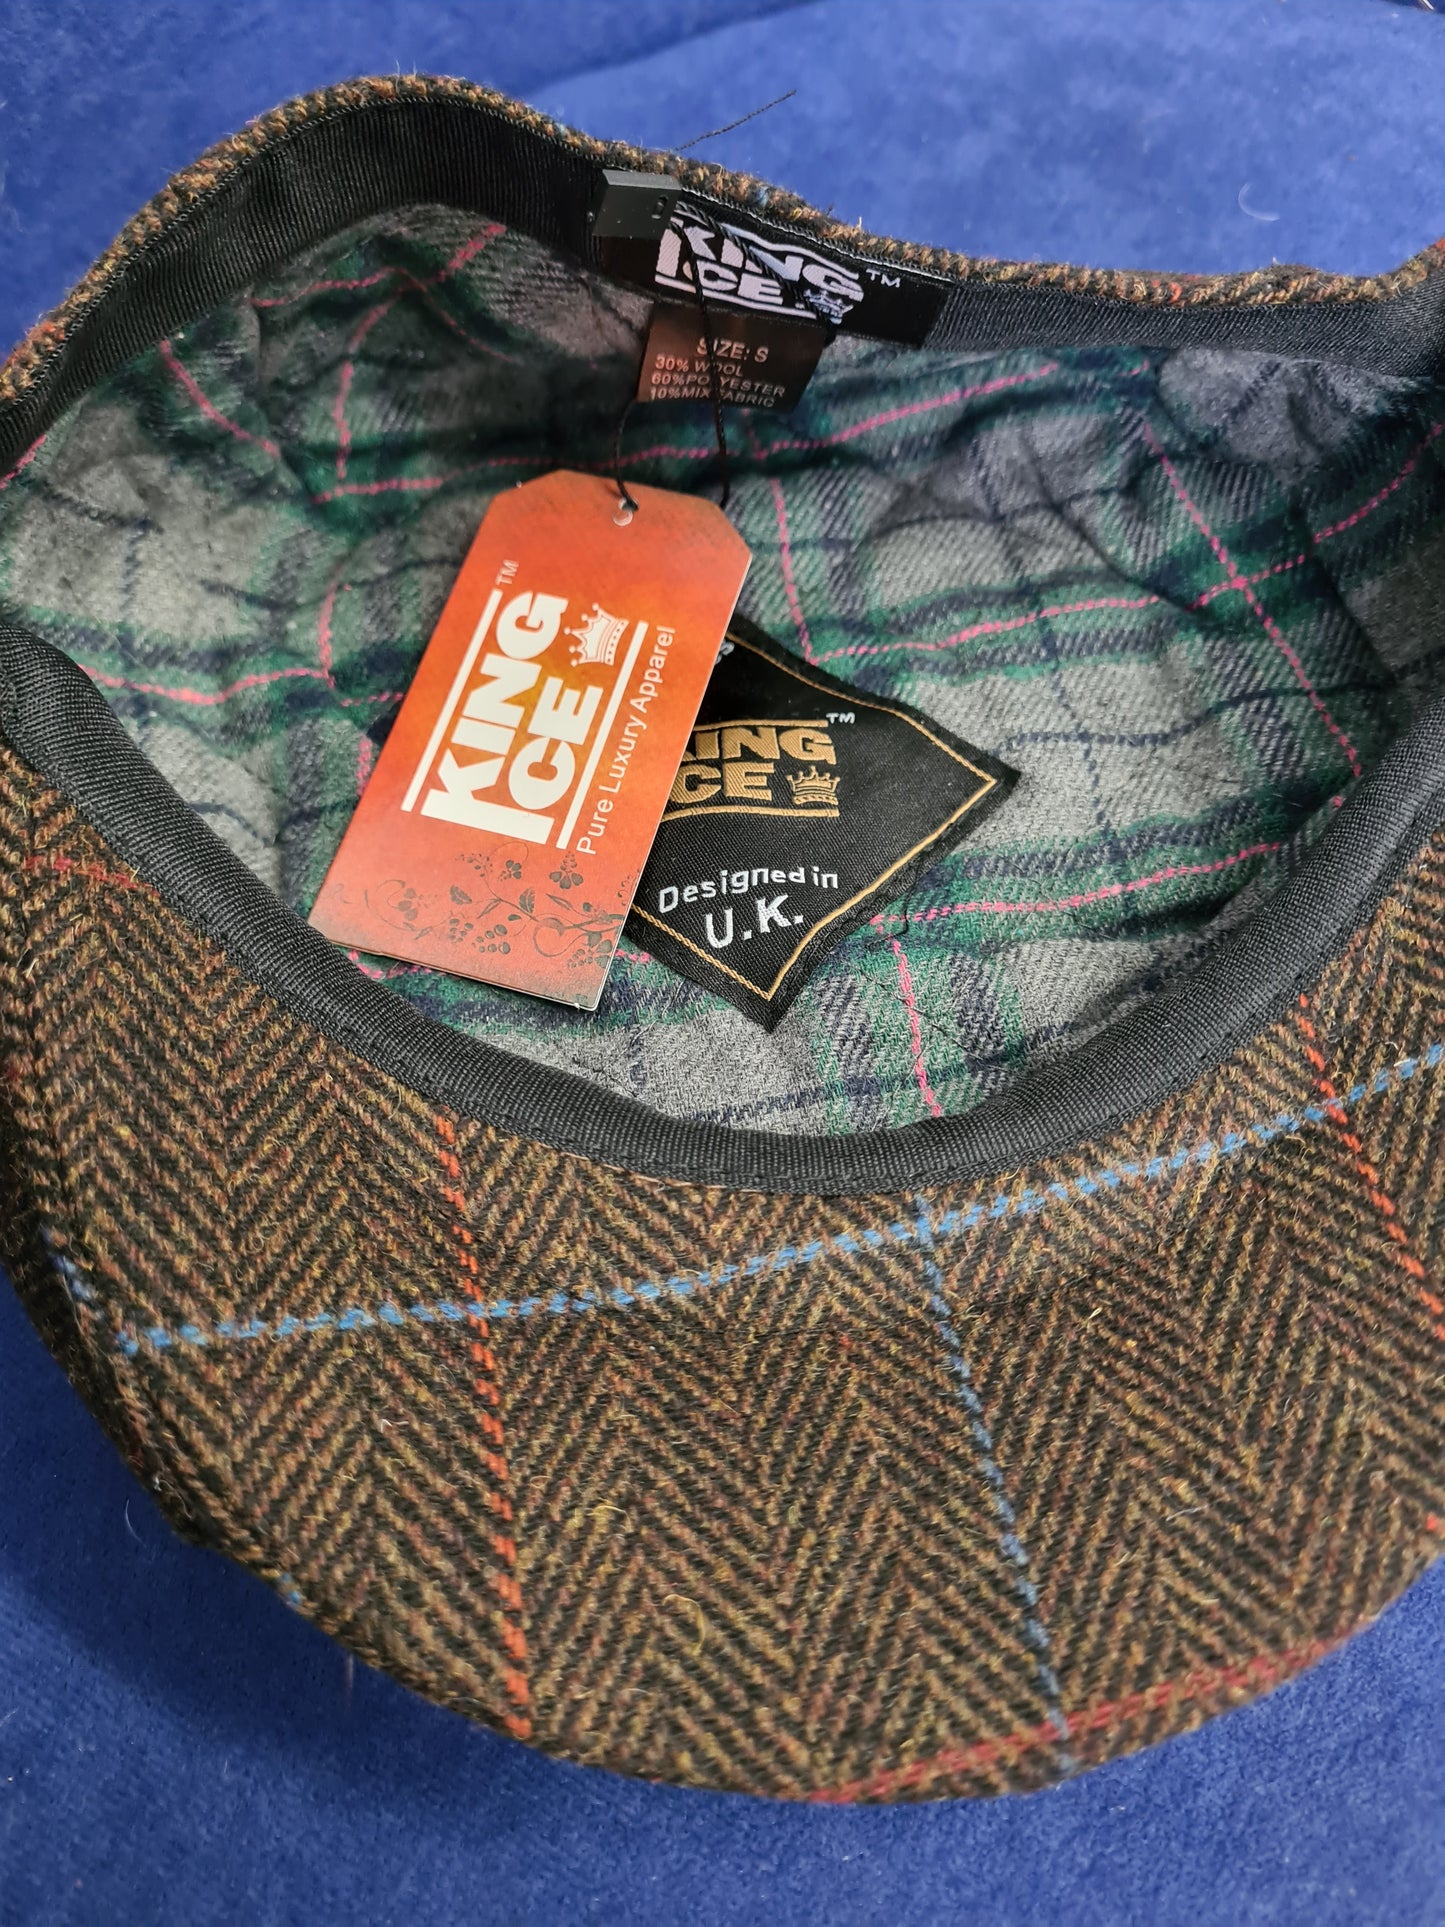 New king ice brown tweed flat cap with orange / red over check FREE POSTAGE🟢